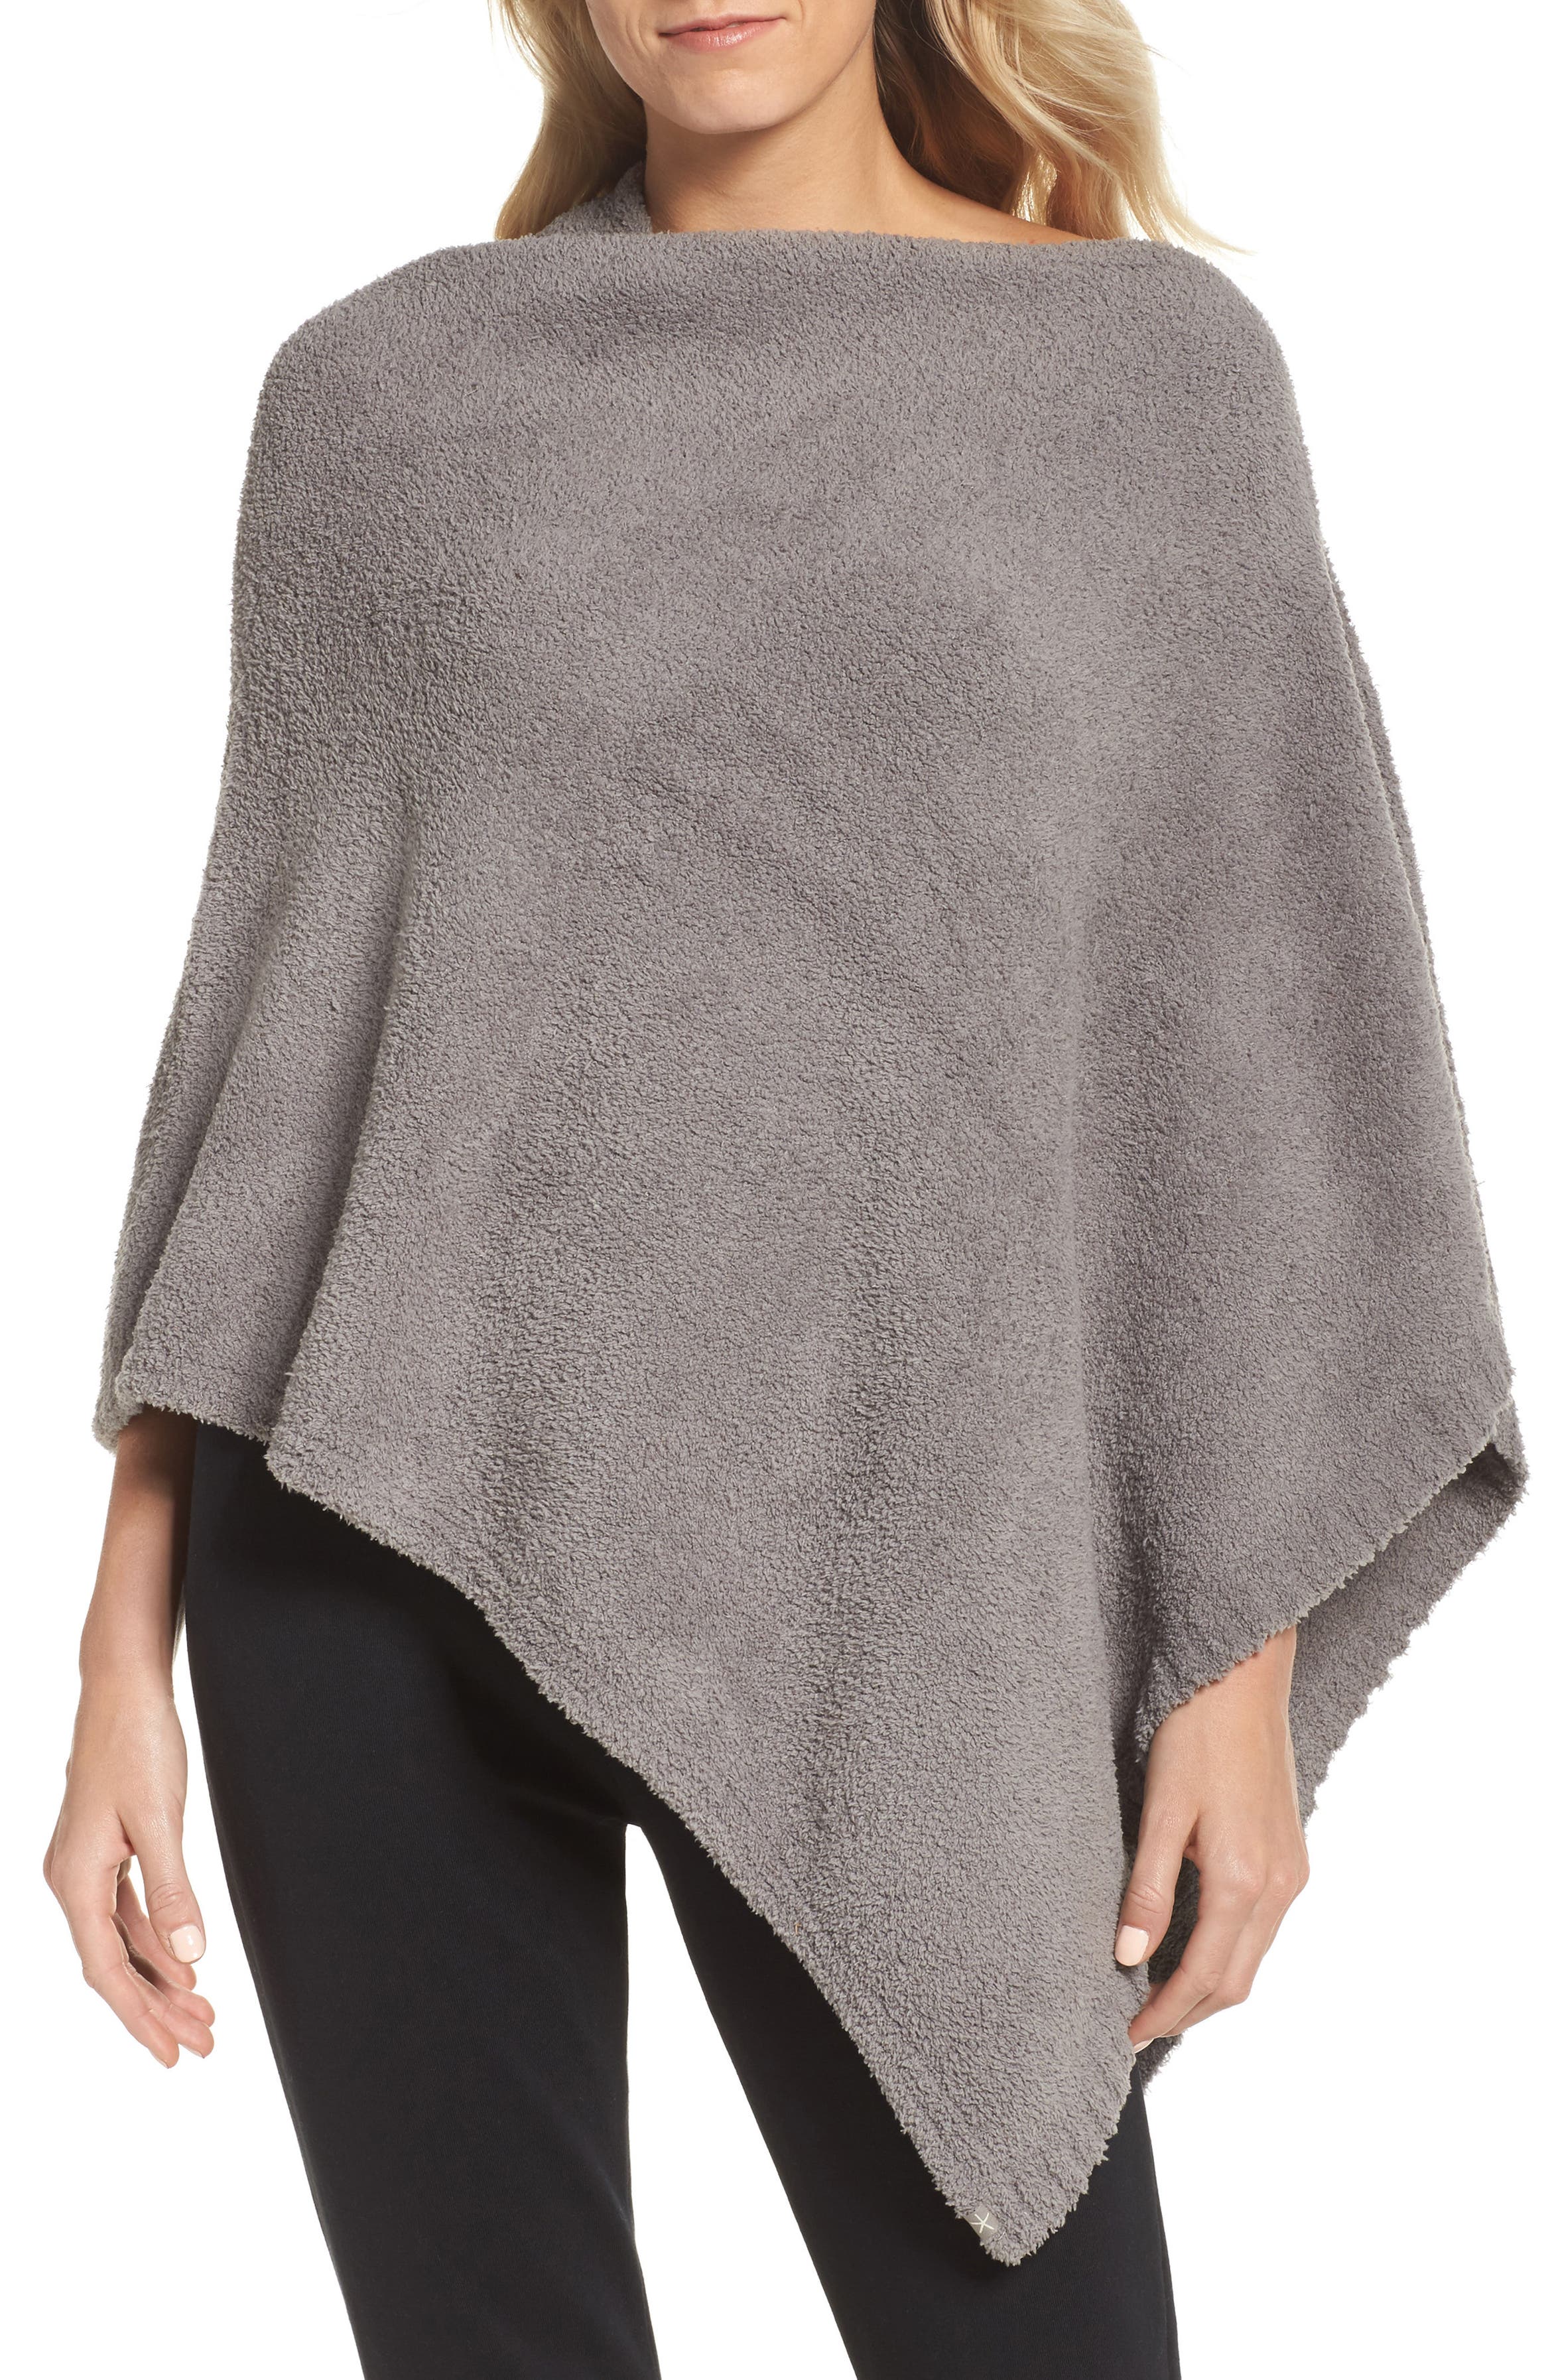 Barefoot Dreams® Boatneck CozyChic® Poncho | Nordstrom